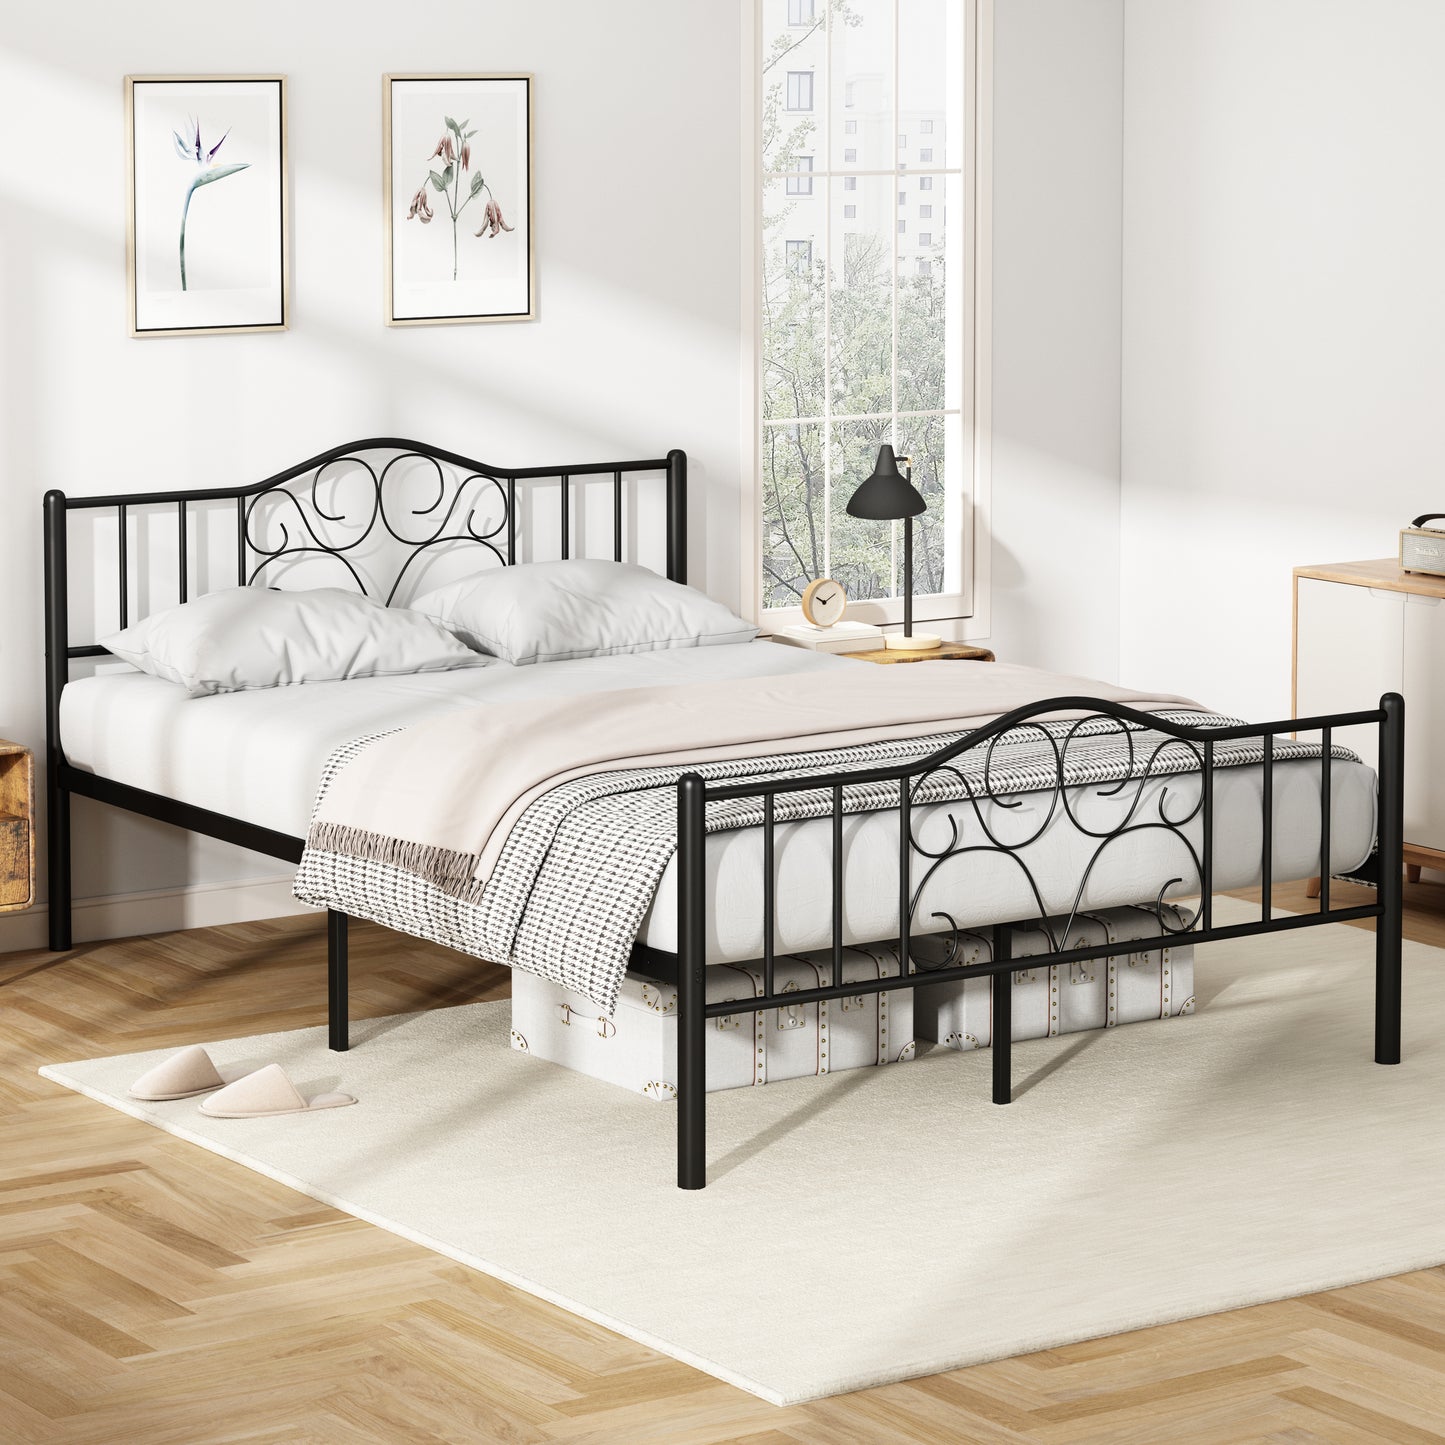 Queen Size Bed Frame with Headboard, Metal Queen Size Platform Bed frame with Steel Slats Support, Black